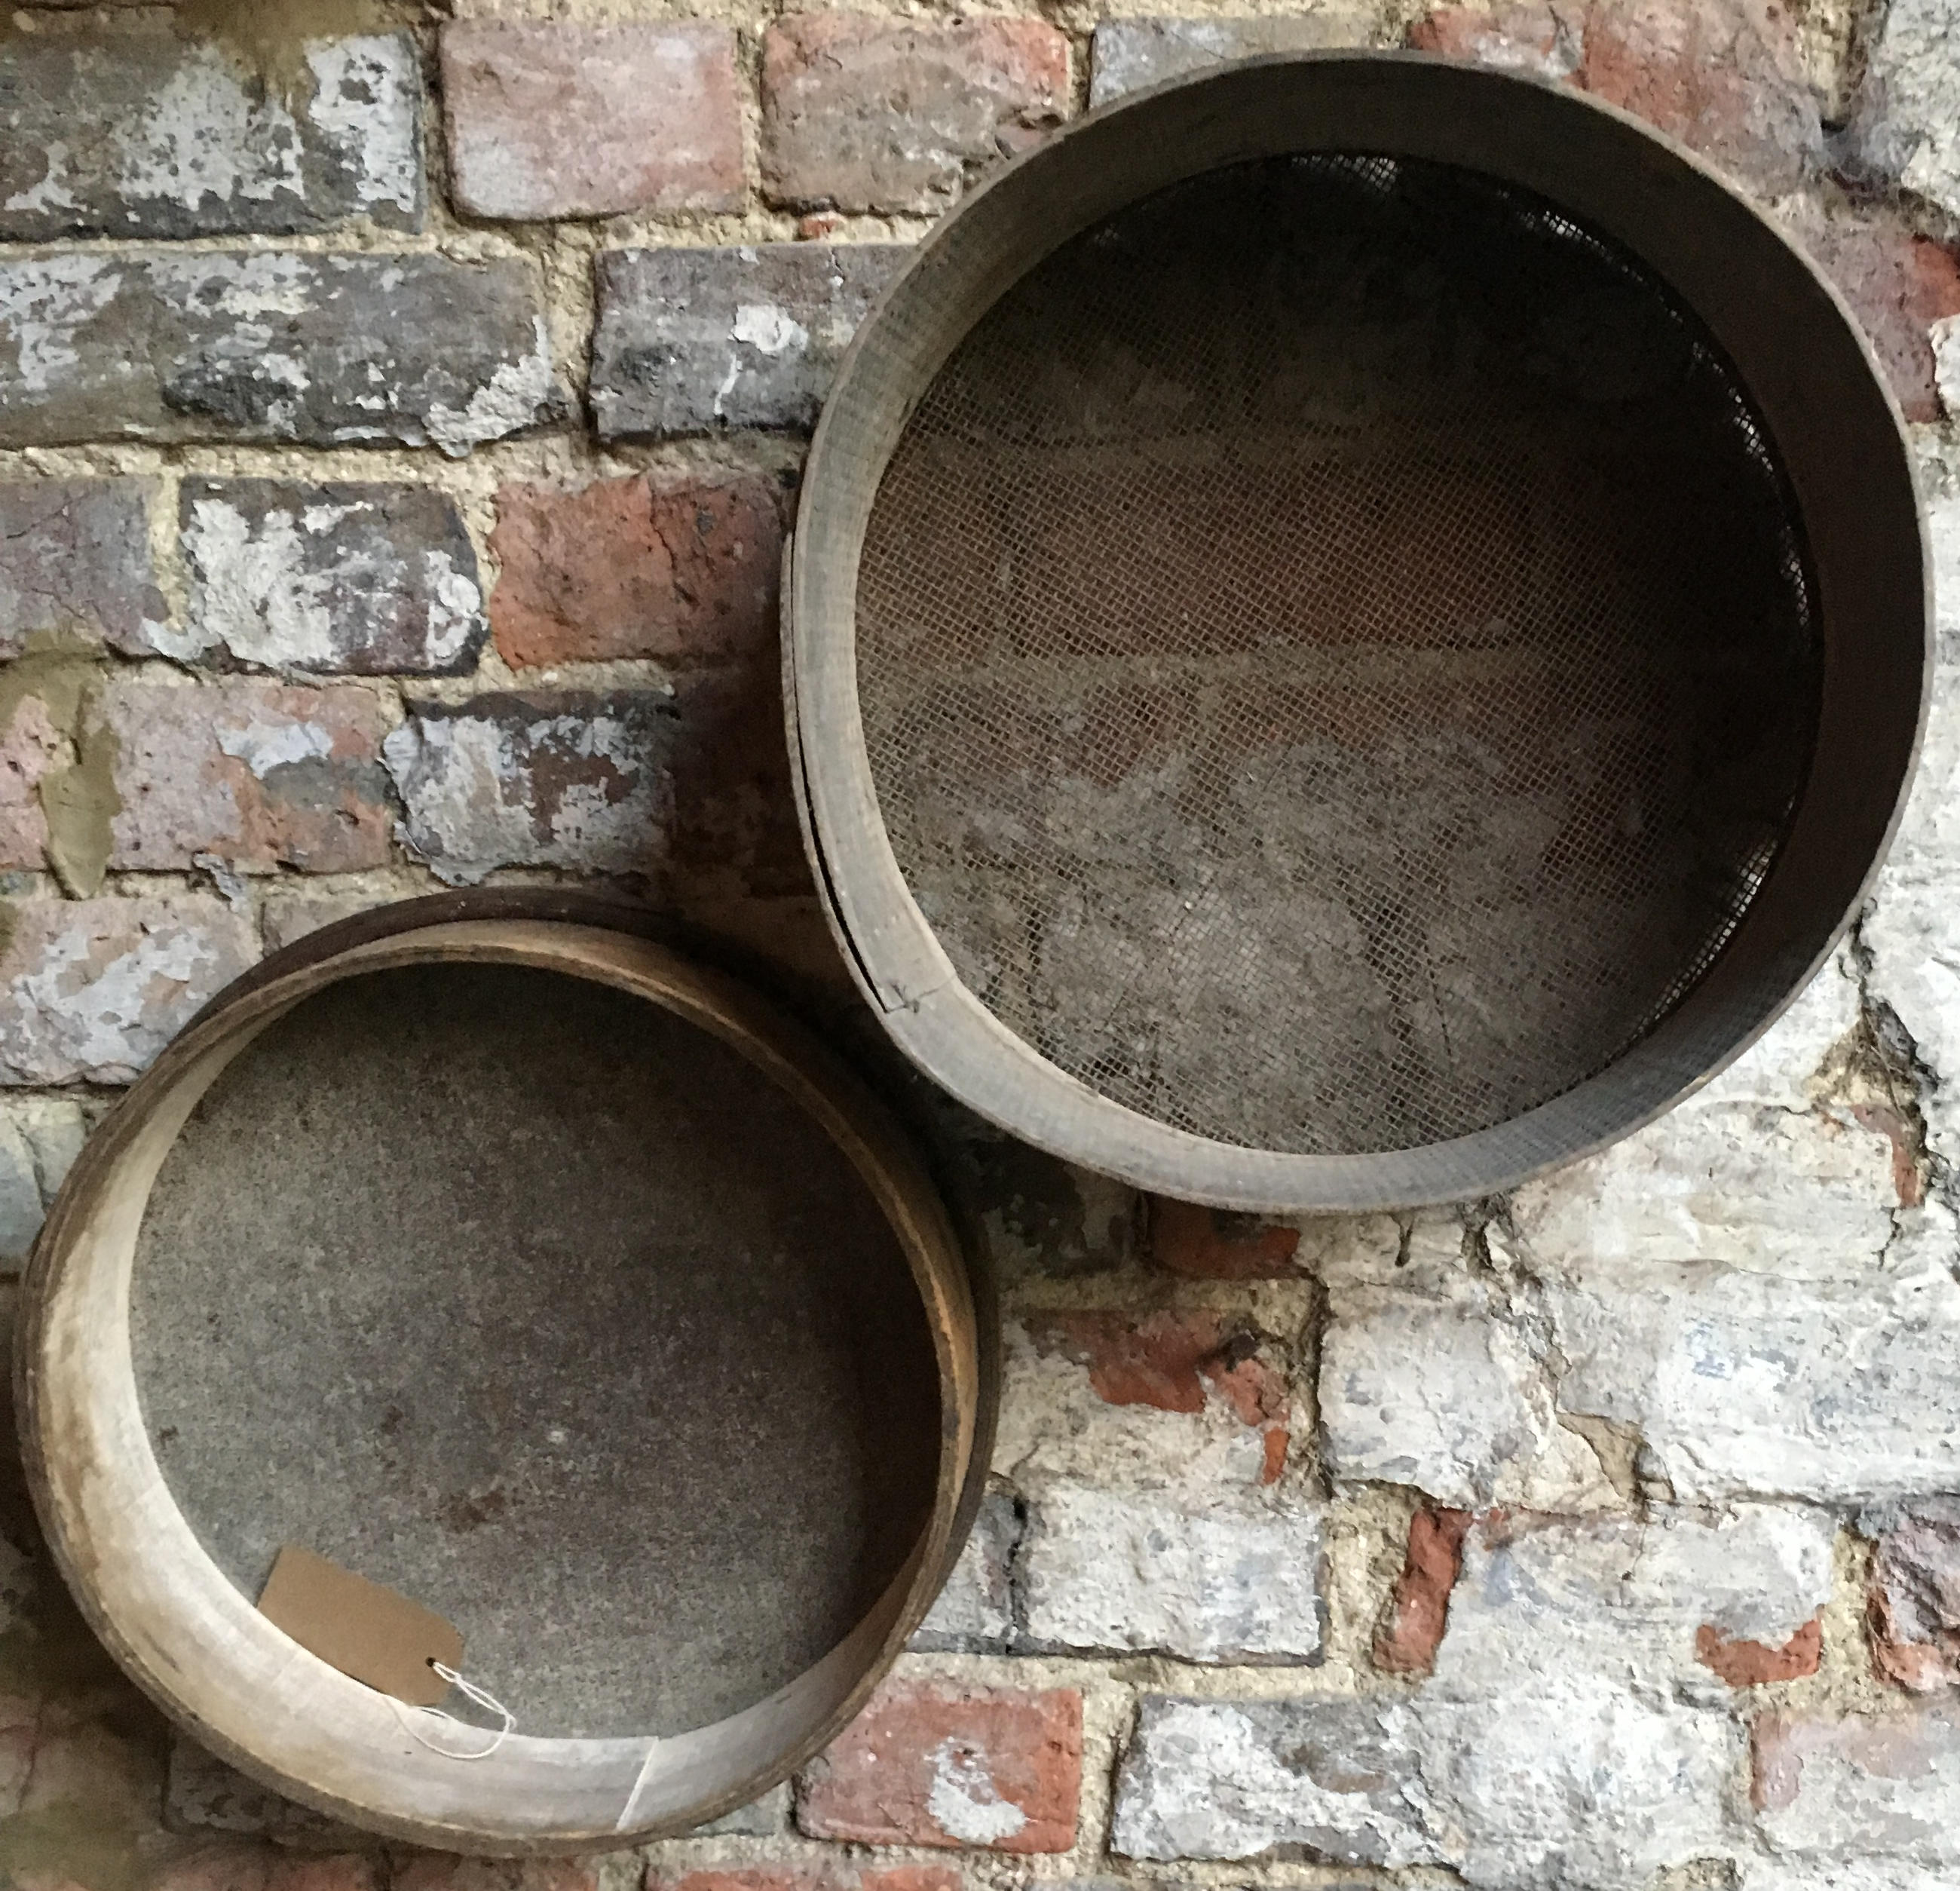 The Potting Shed Grain Sieve